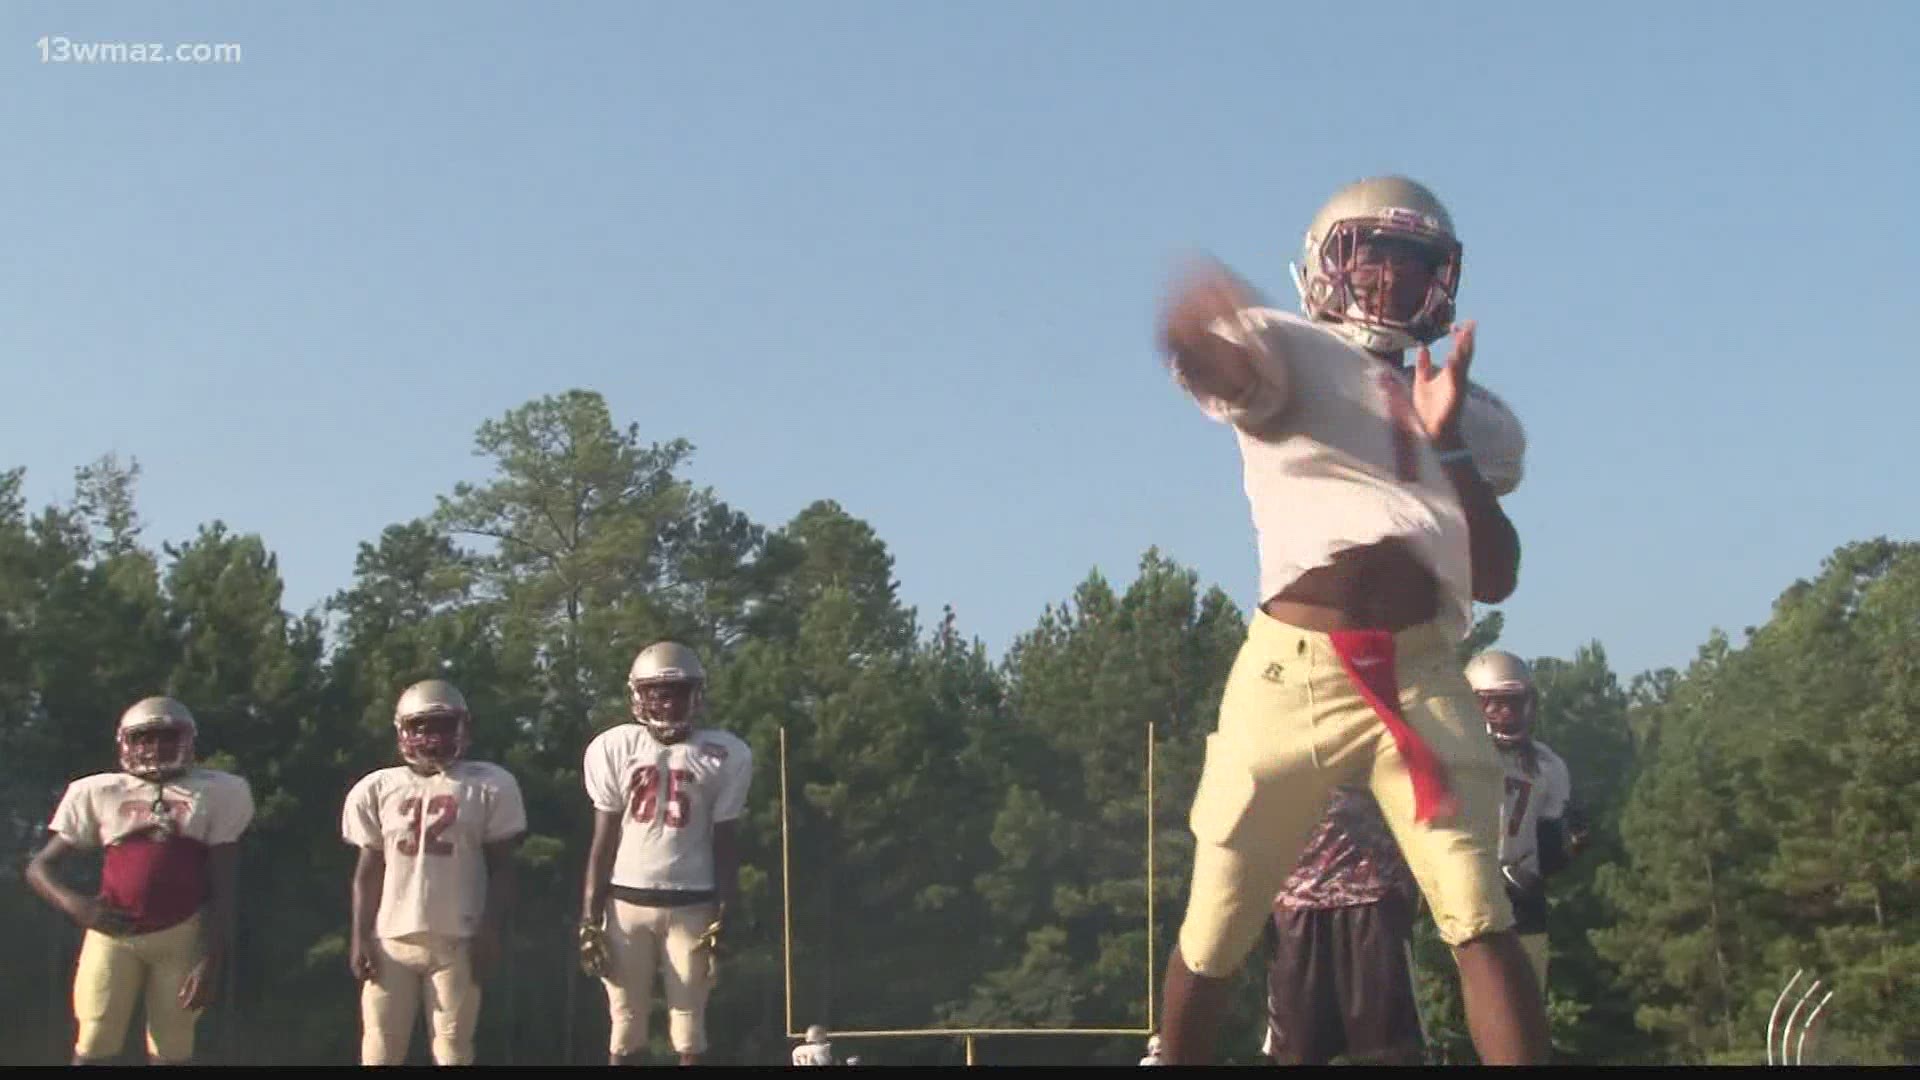 High school football season is not far off, and right here in Macon, the Westside Seminoles are preparing to try and take 4-A Region 4.